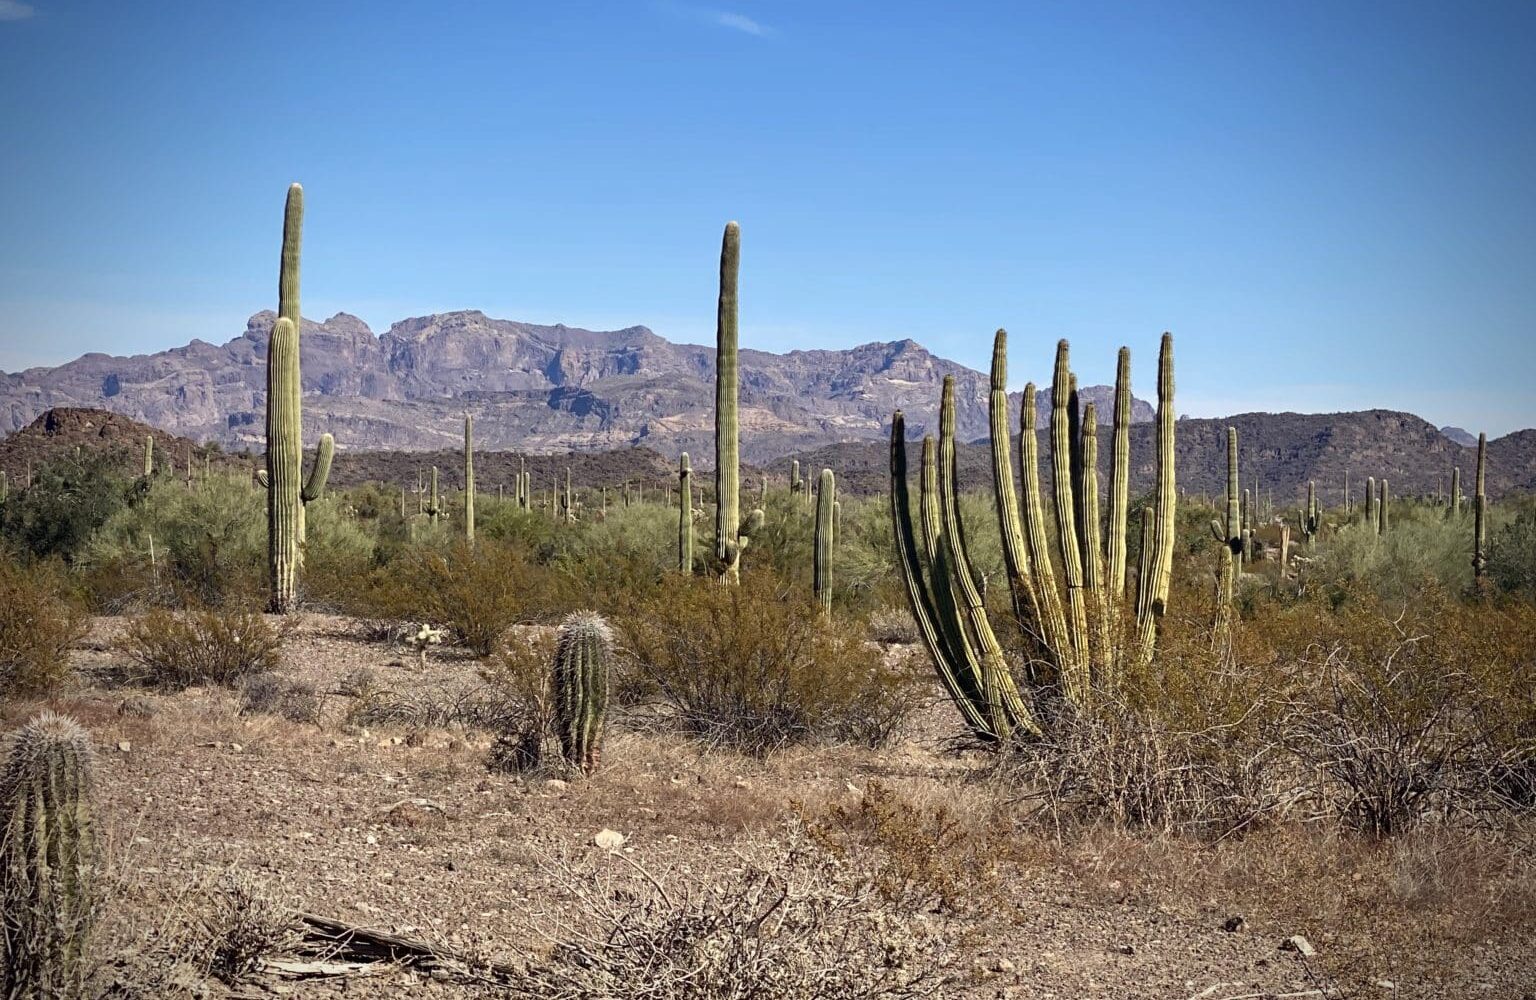 The Puerto Blanco mountains in Organ Pipe Cactus National Monument.